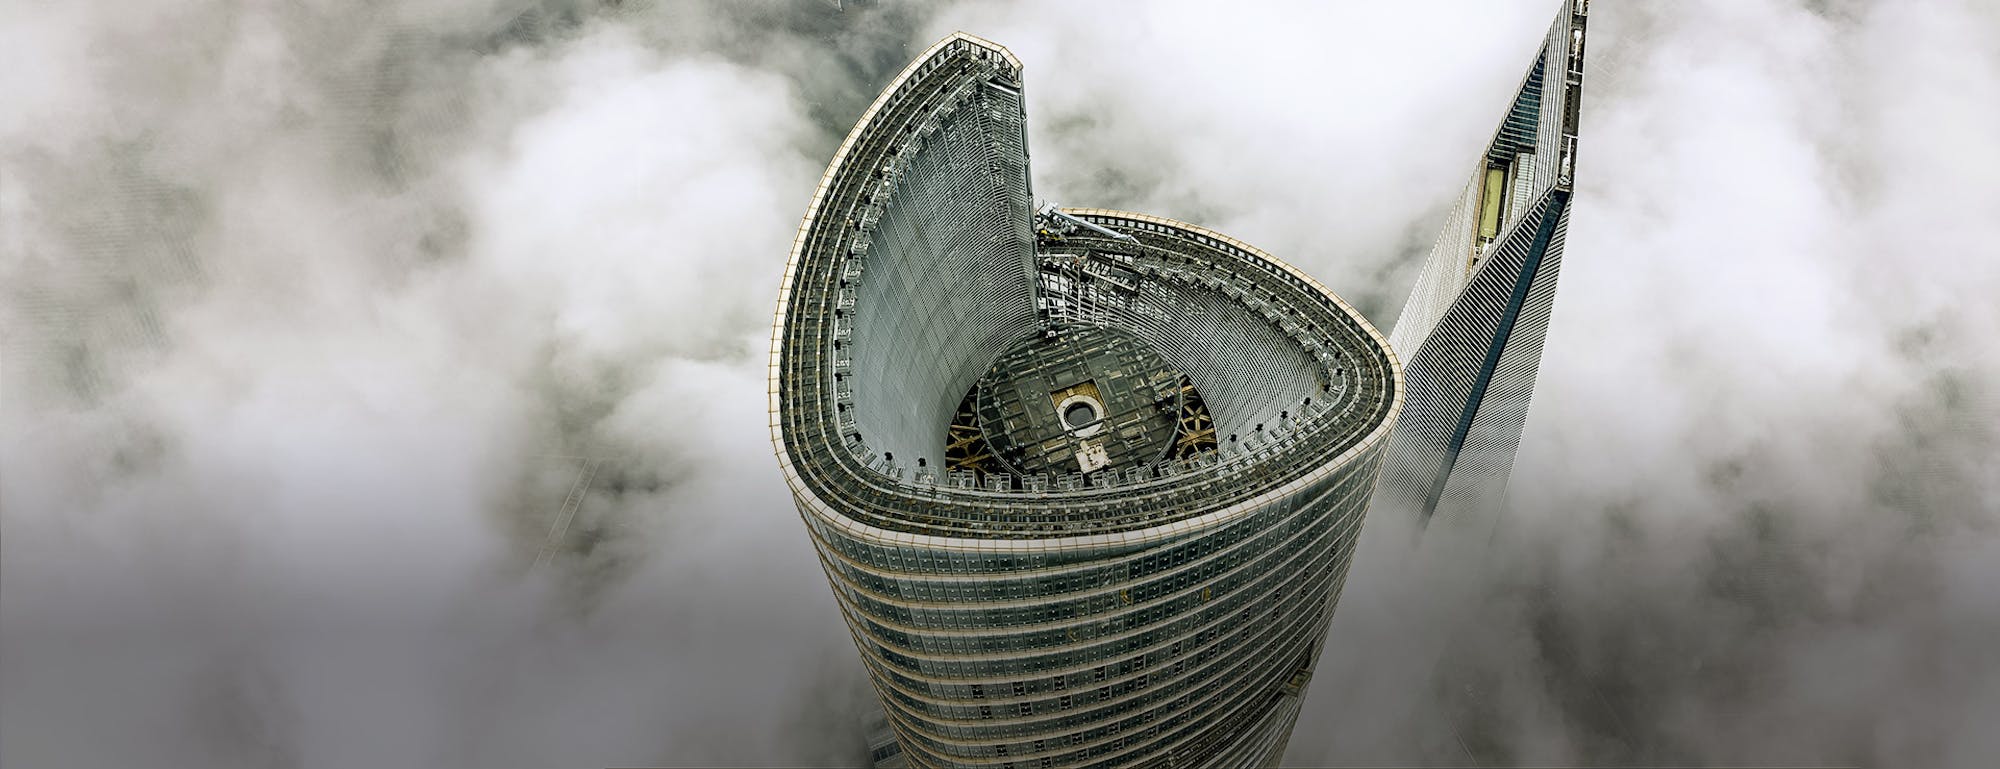 View of the Shanghai Tower skyscraper’s roof